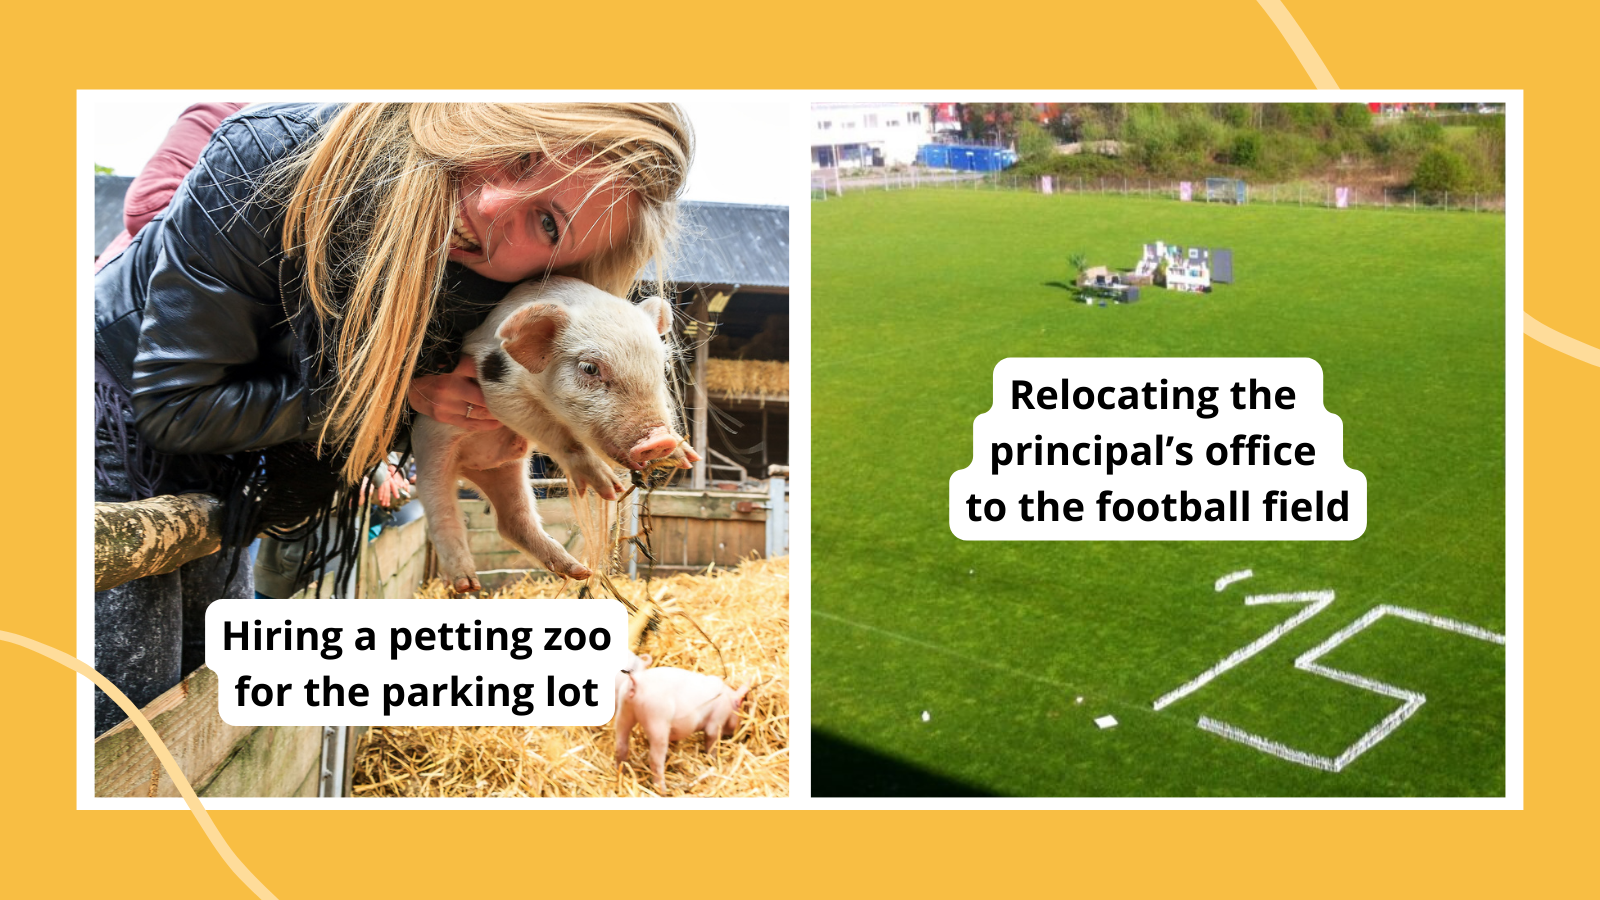 Paired image of senior pranks: high school petting zoo and relocating principal's office